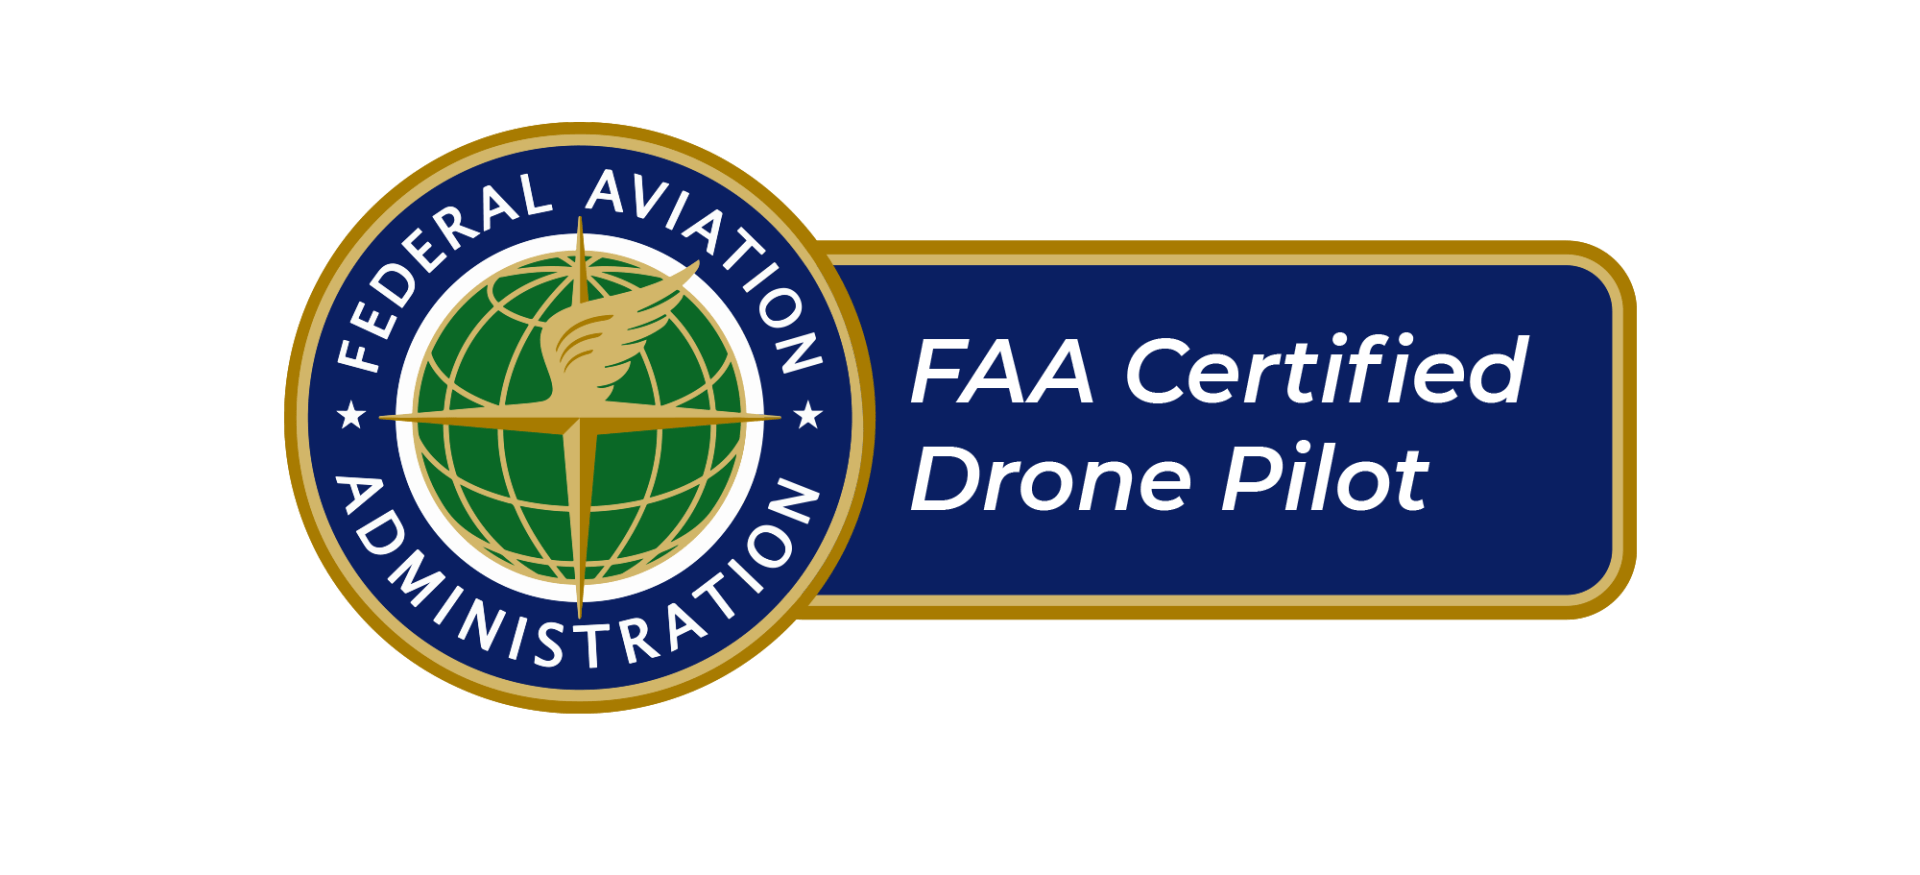 A federal aviation administration certified drone pilot logo